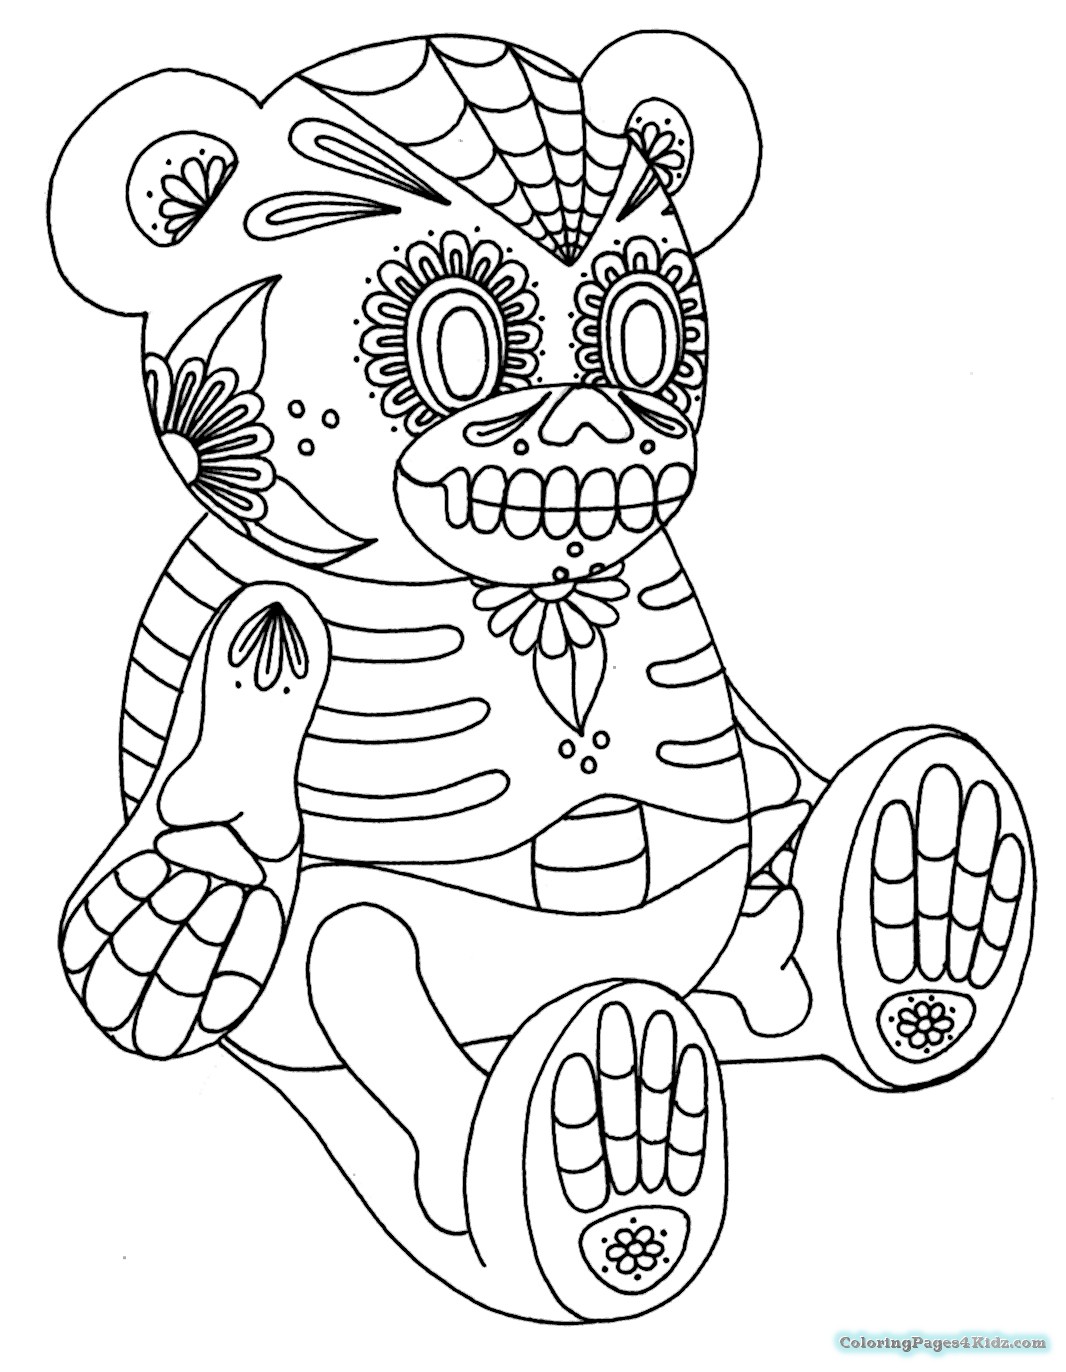 simple-sugar-skull-coloring-pages-at-getcolorings-free-printable-colorings-pages-to-print